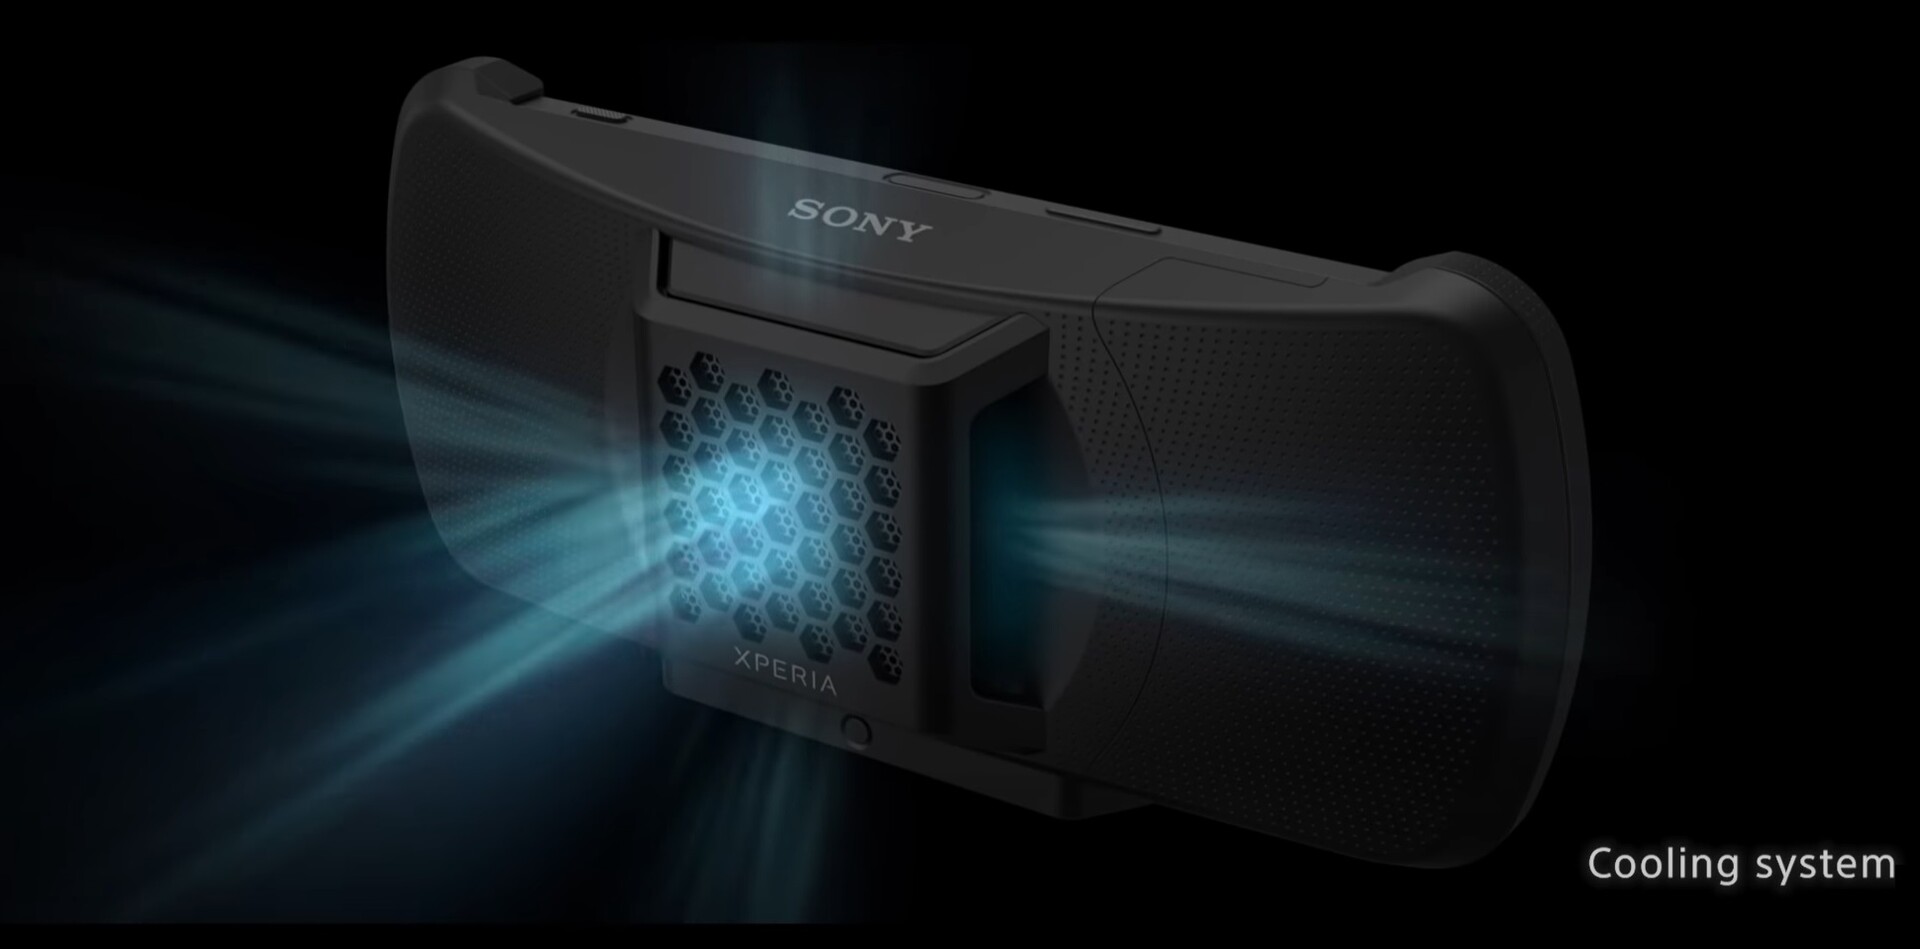 Sony teases Xperia gaming gear cooling system cutting short hopes